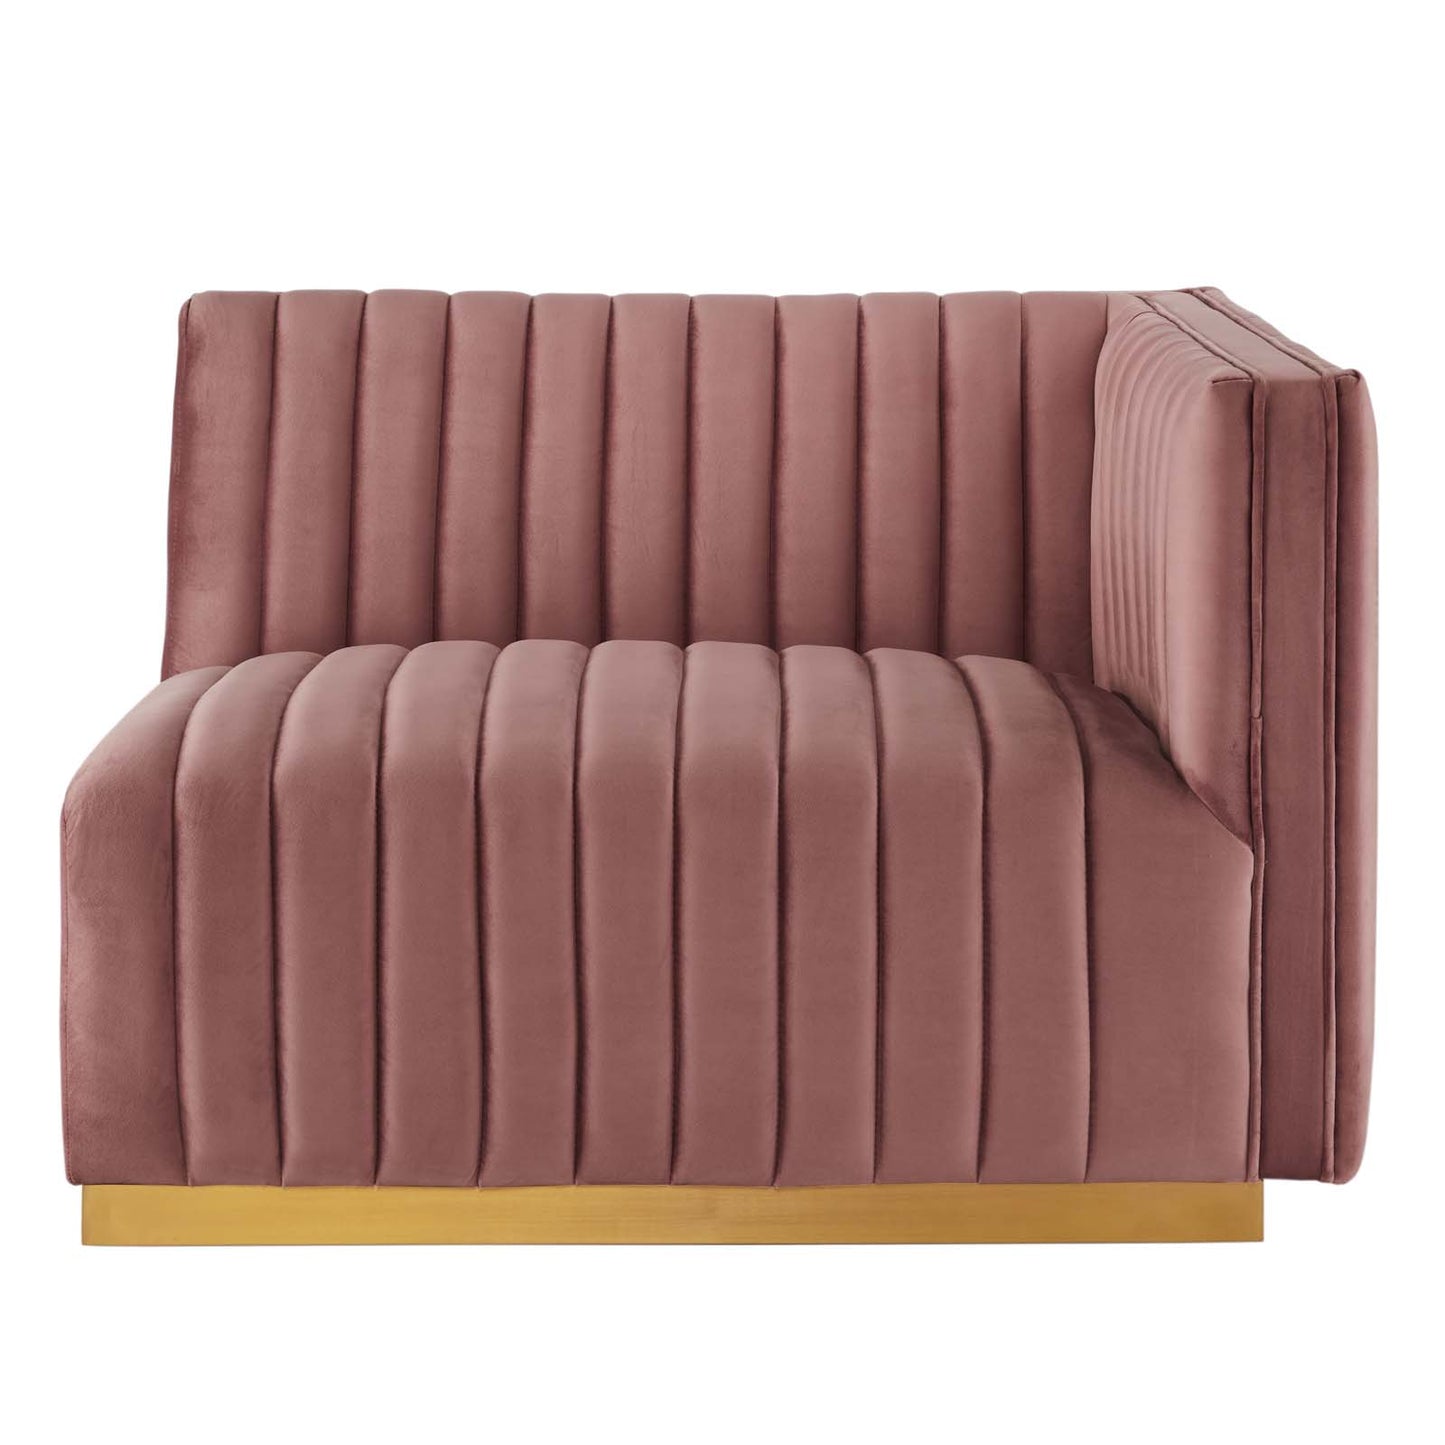 Conjure Channel Tufted Performance Velvet Right-Arm Chair Gold Dusty Rose EEI-5503-GLD-DUS